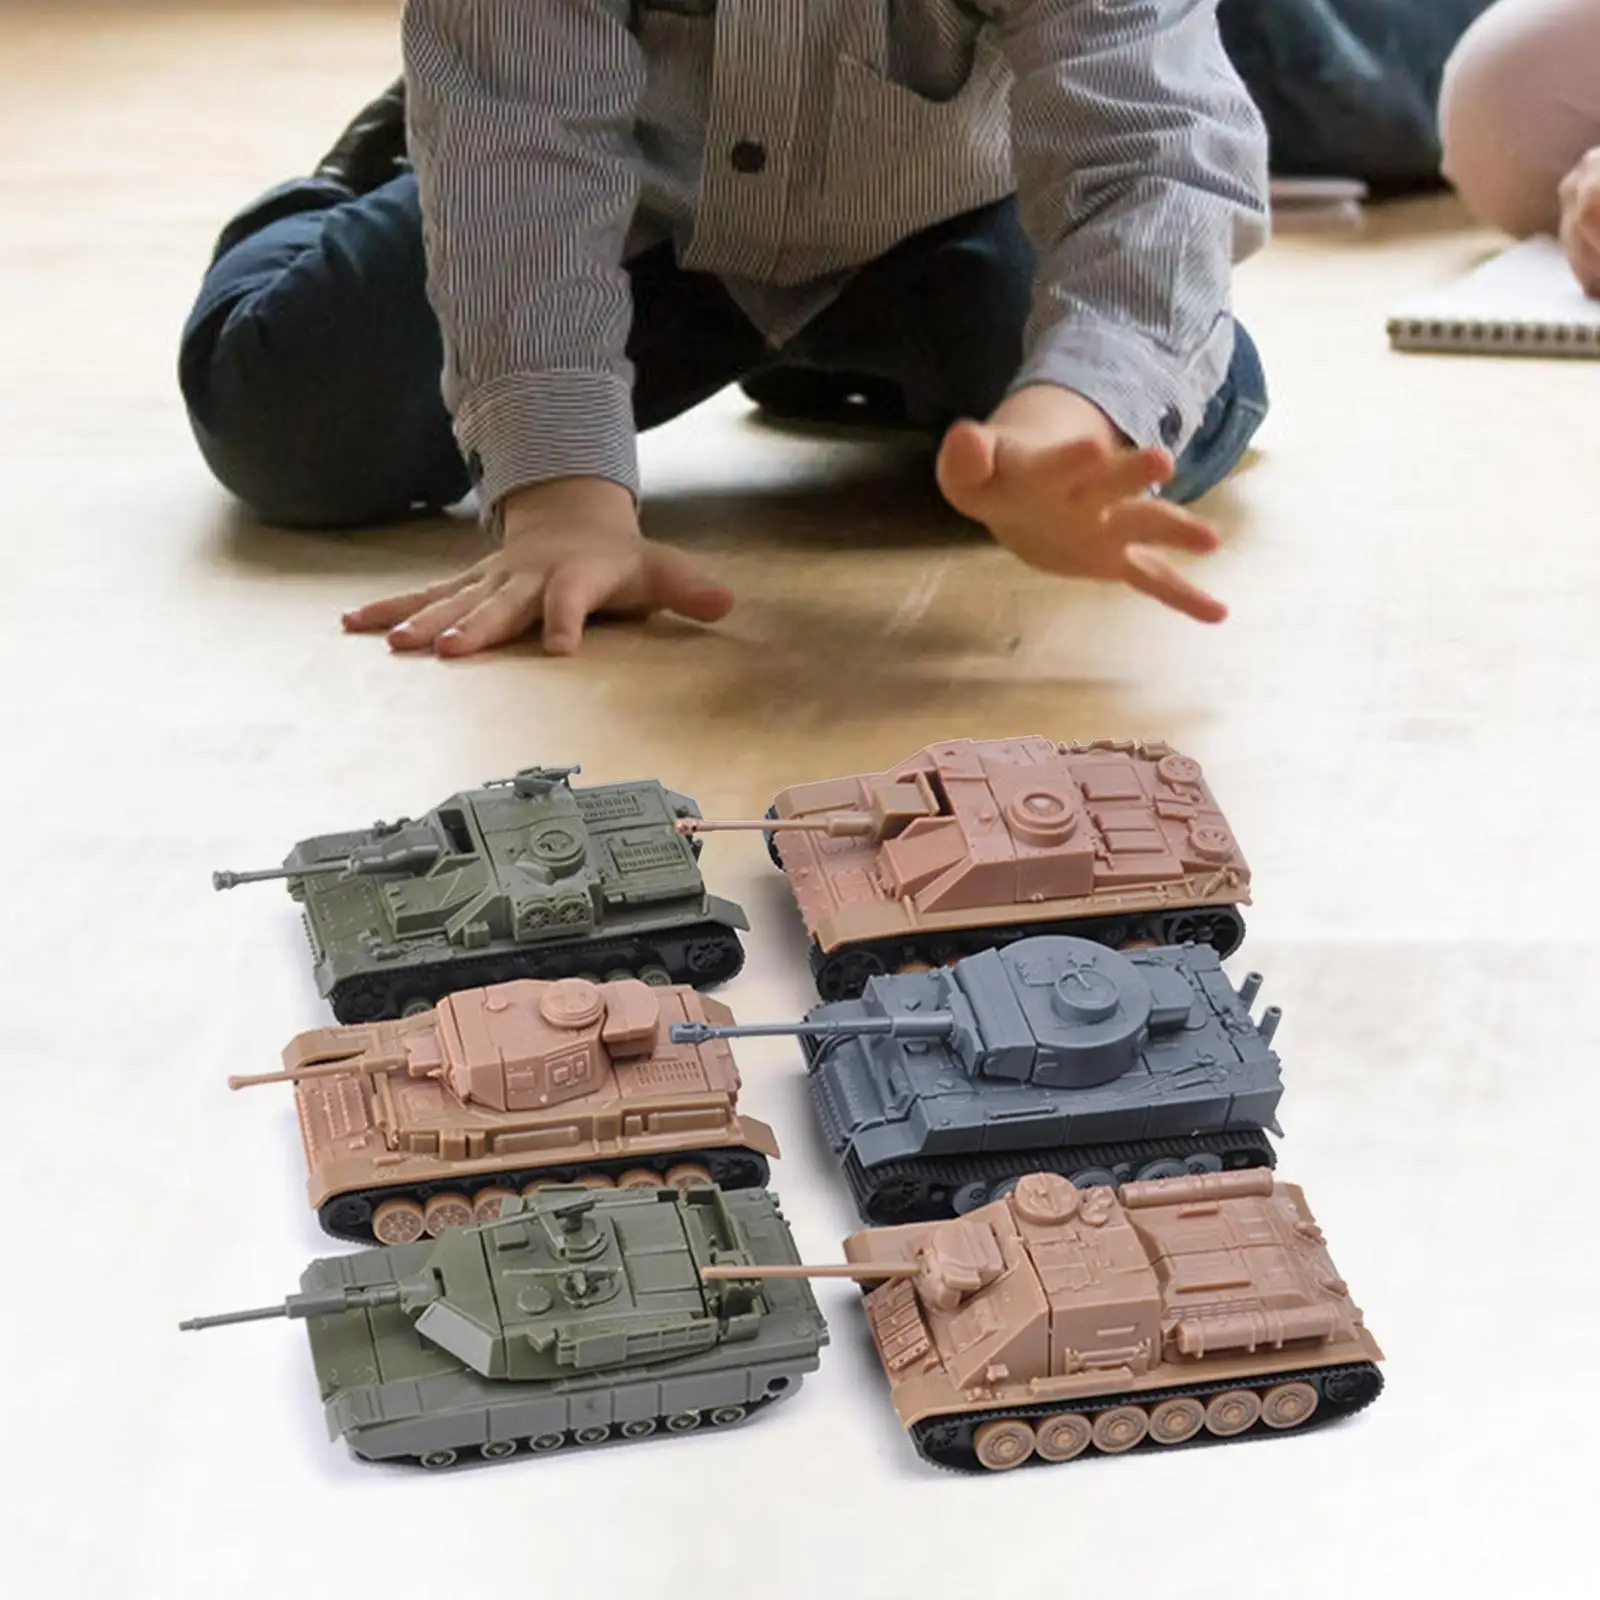 6x Static Tanks Collection Ornaments Toys Party Favors Military Display Gift for Boy and Girl Adult Kids Children Beginners